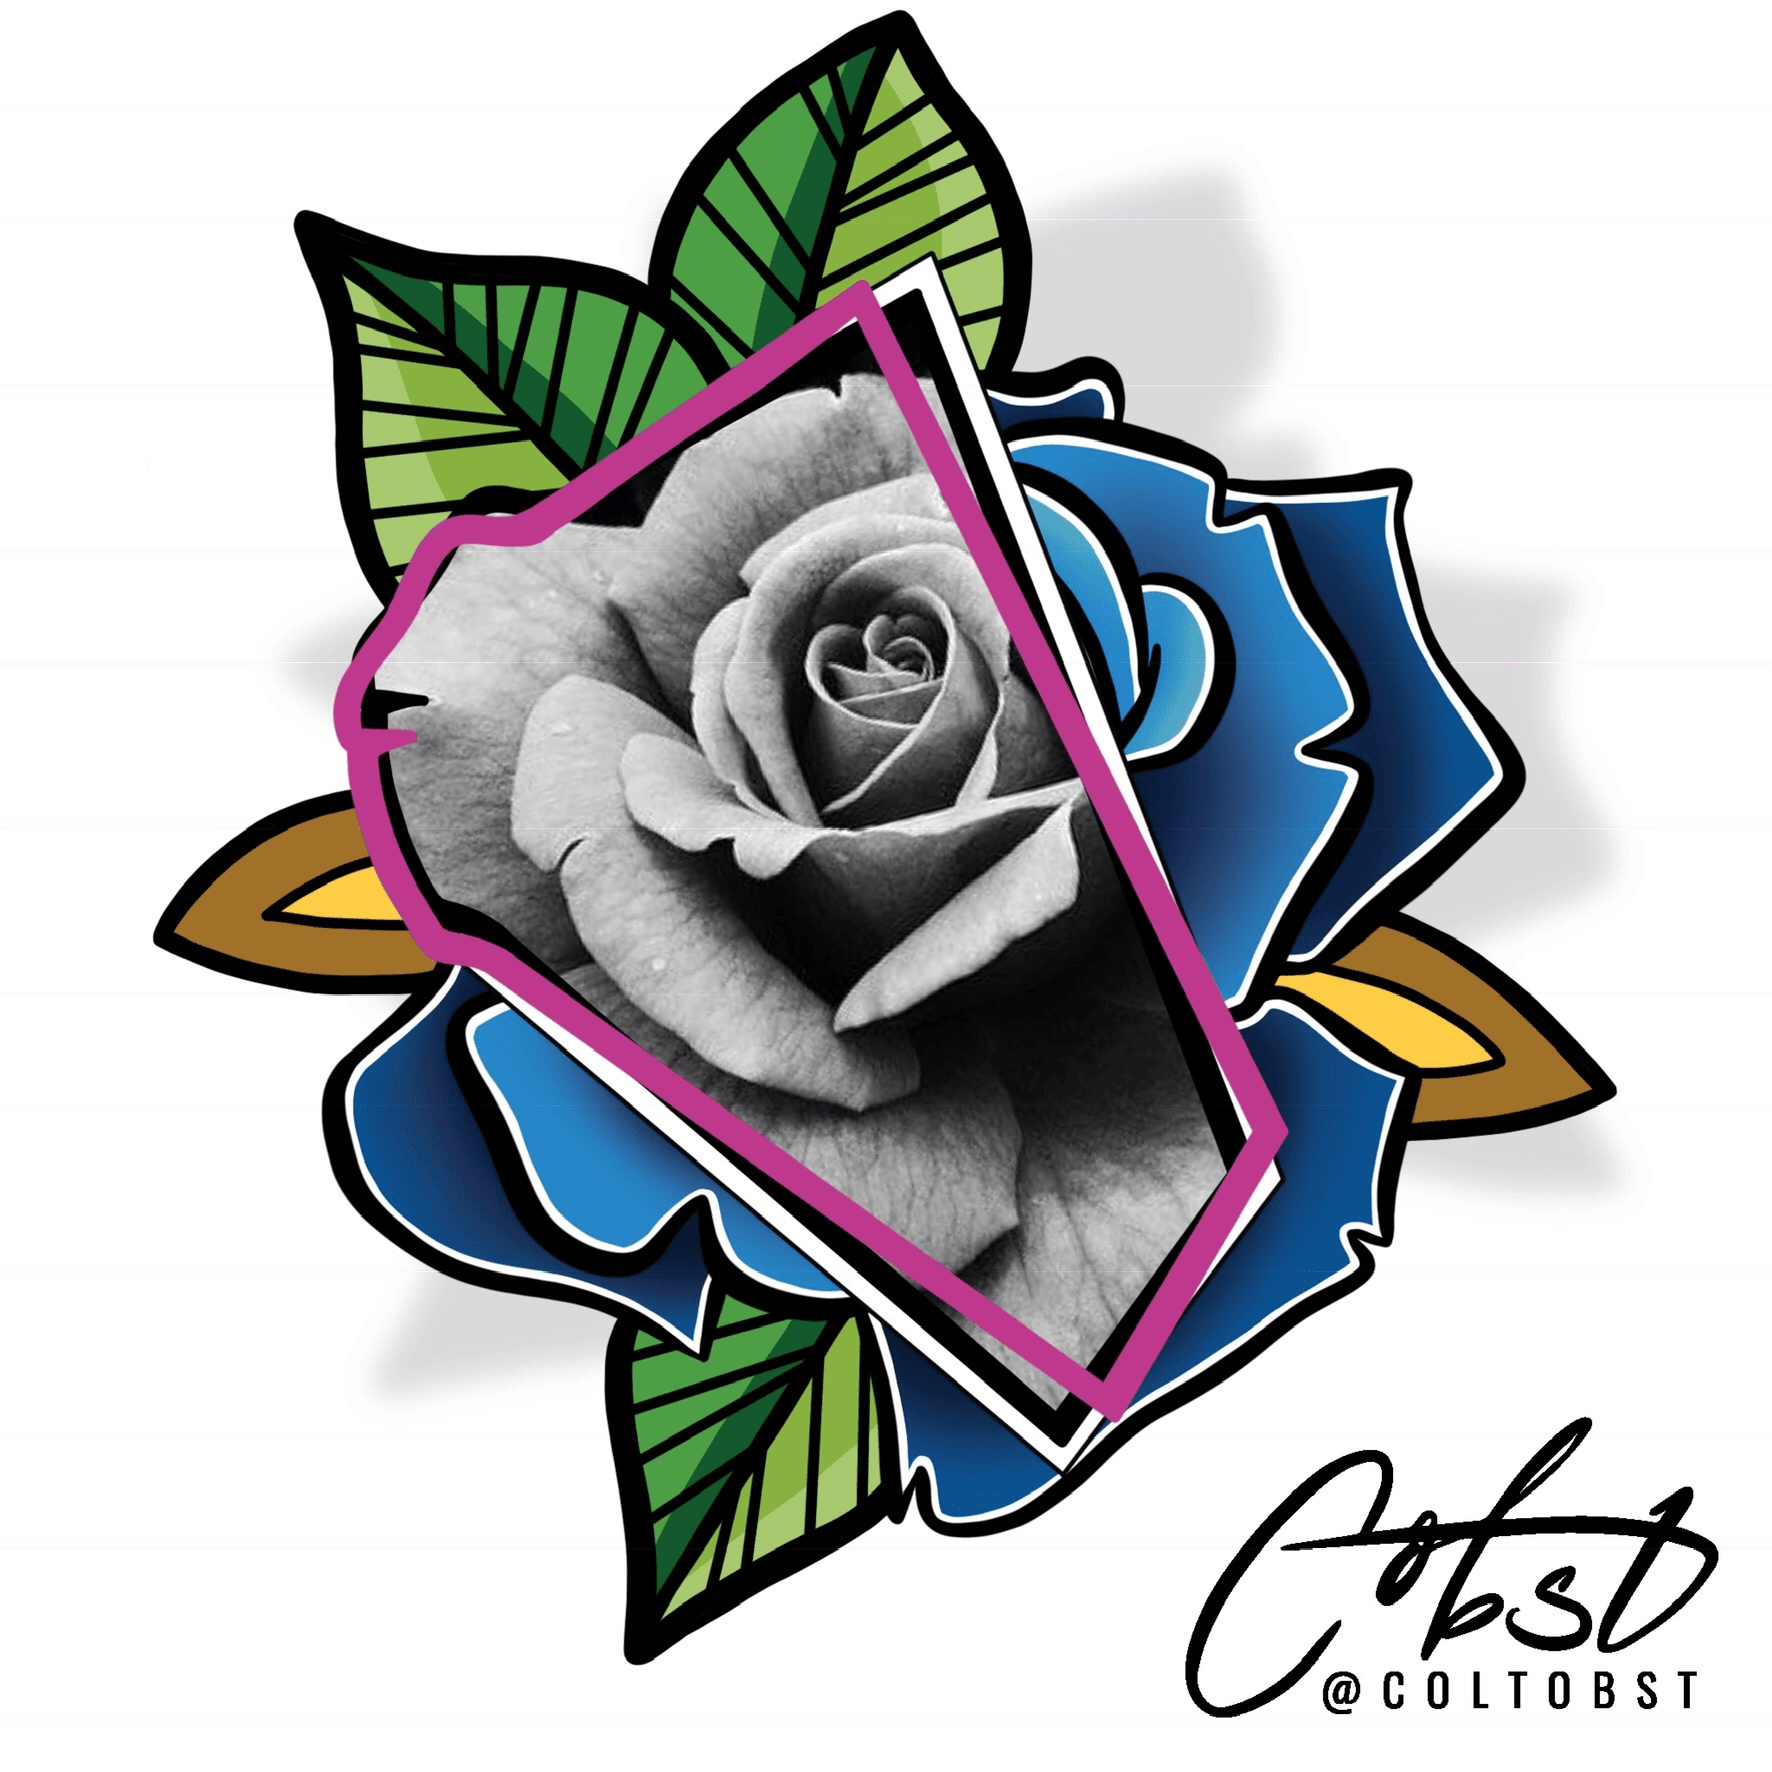 80 Neotraditional Rose Tattoo Ideas